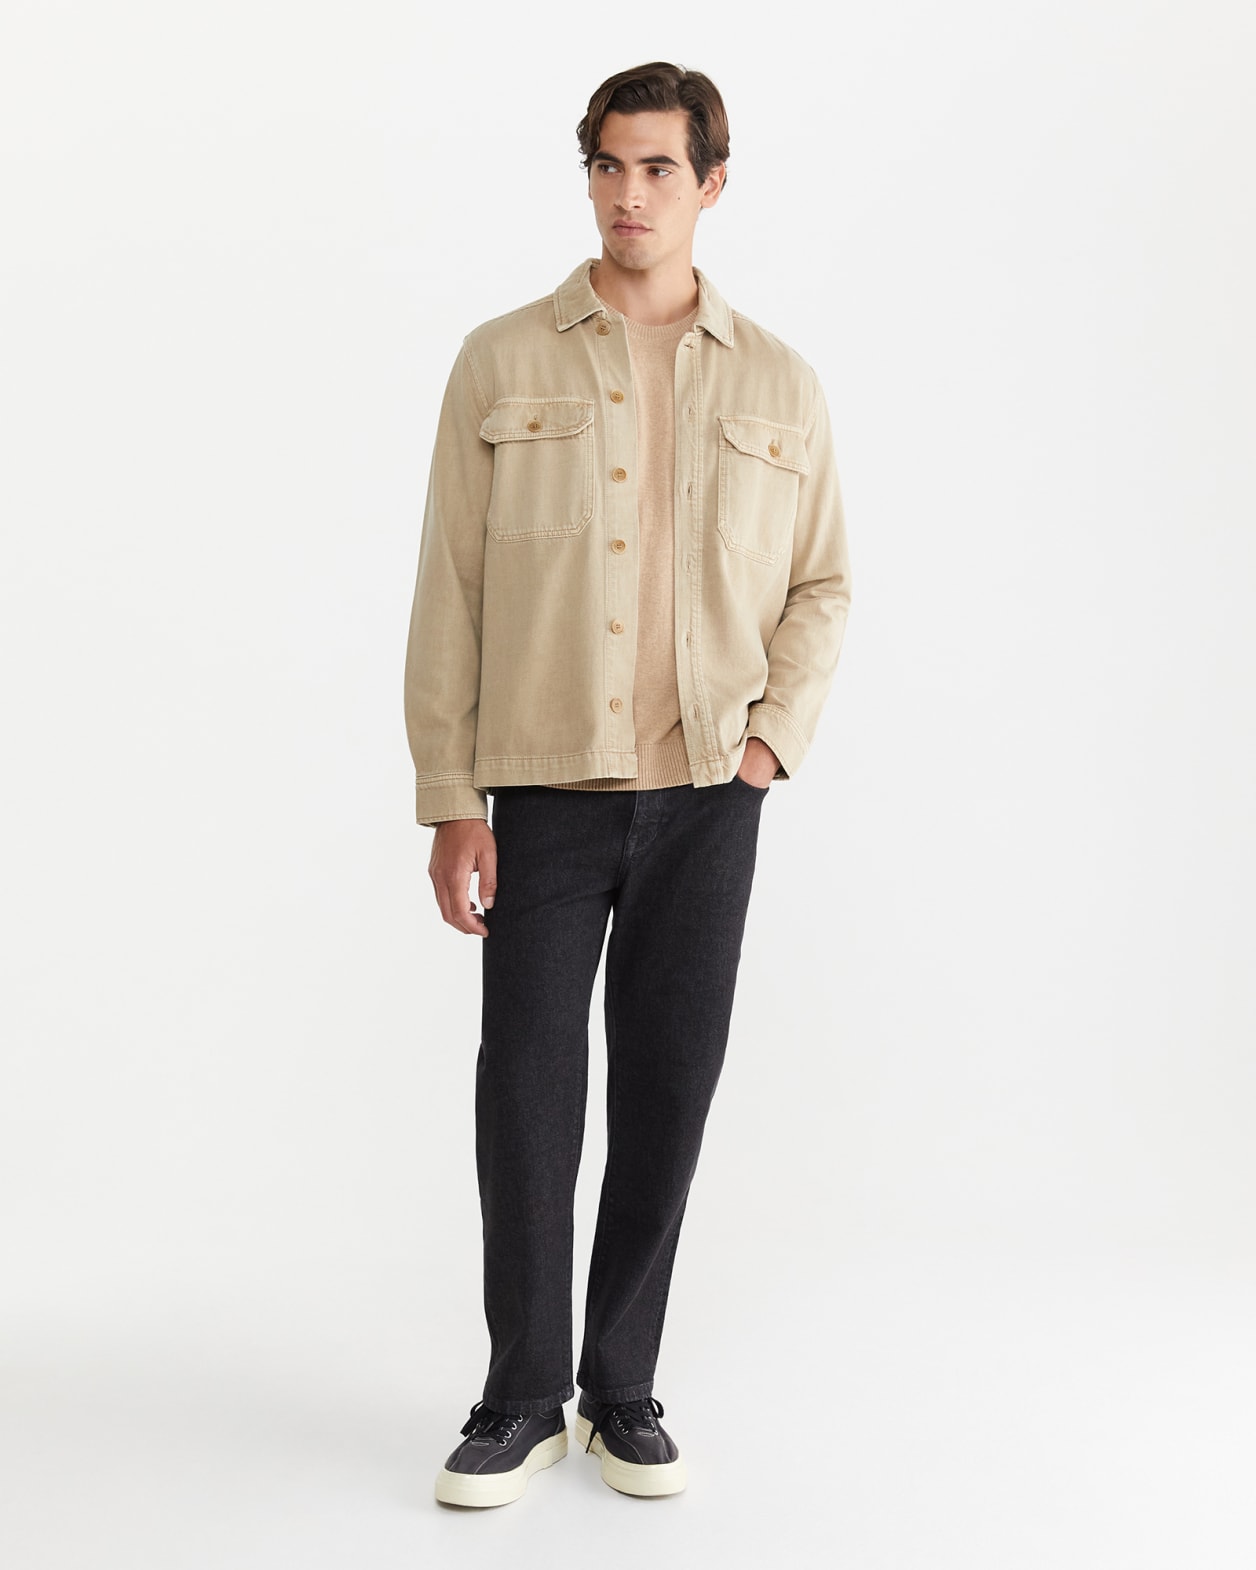 Overdyed Shirt Jacket in NEUTRAL